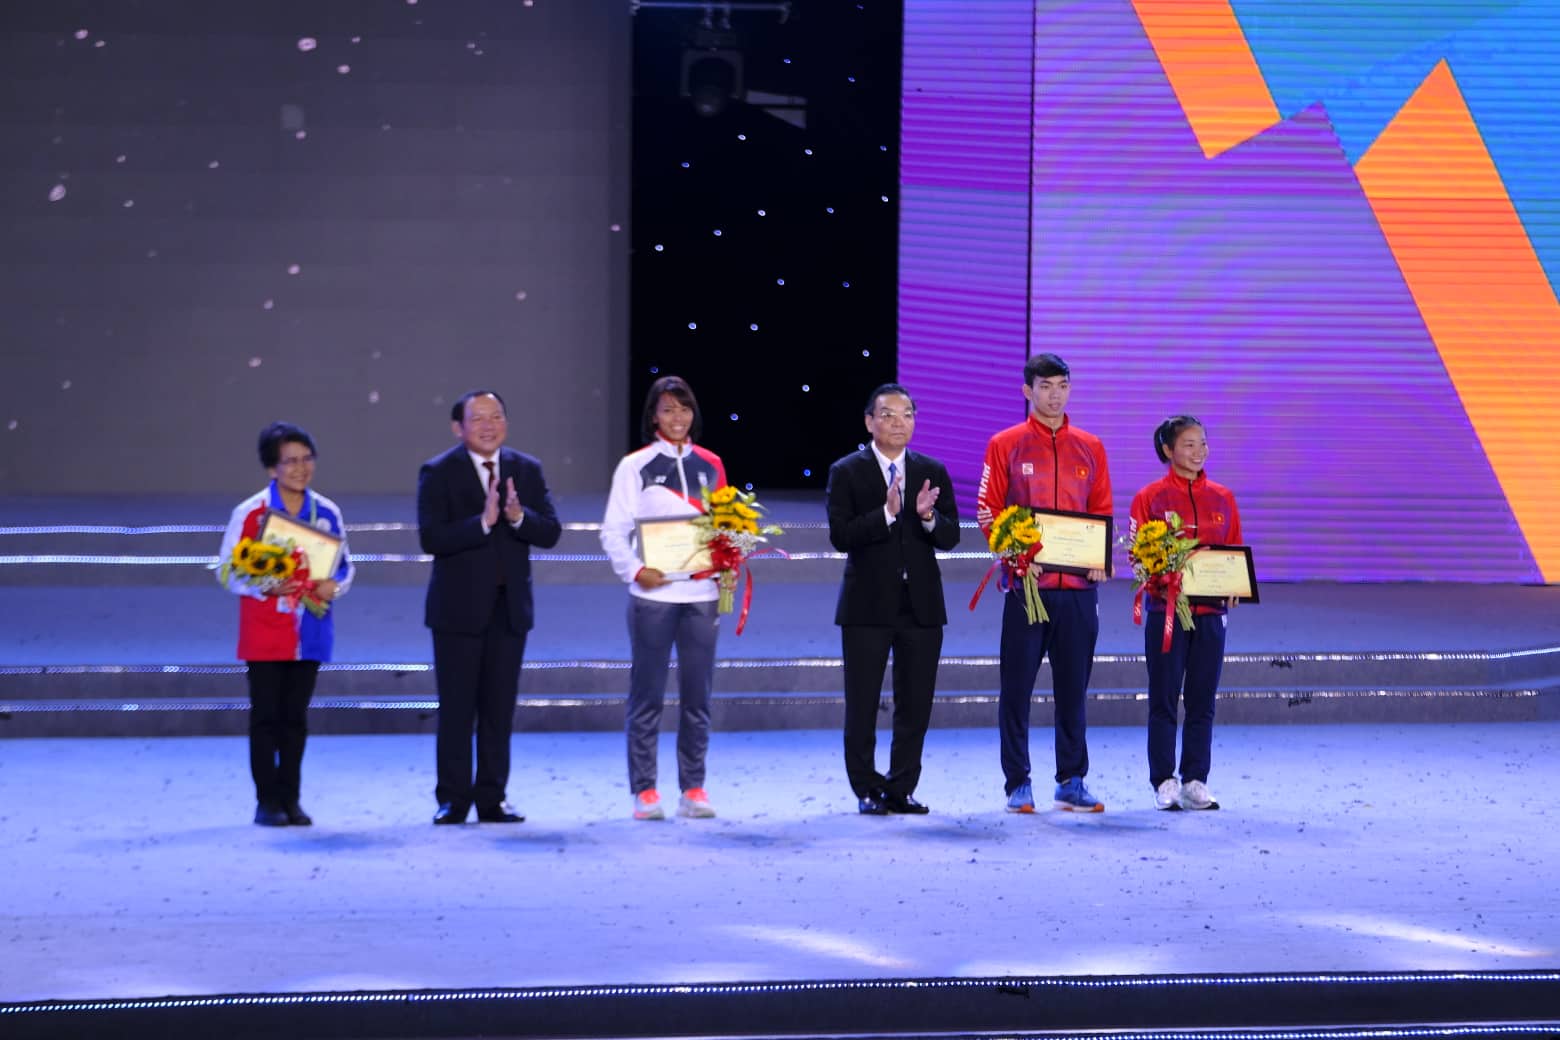 Vietnam’s Nguyen Thi Oanh (R, 1st) and Nguyen Huy Hoang (R, 2nd), a representative of Thailand’s Joshua Robert Atkinson (L), and Singapore’s Jing Wen Quah (R, 3rd) receive honor as the 31st SEA Games’ best athletes at its closing ceremony in Hanoi, May 23, 2022. Photo: Nam Tran / Tuoi Tre